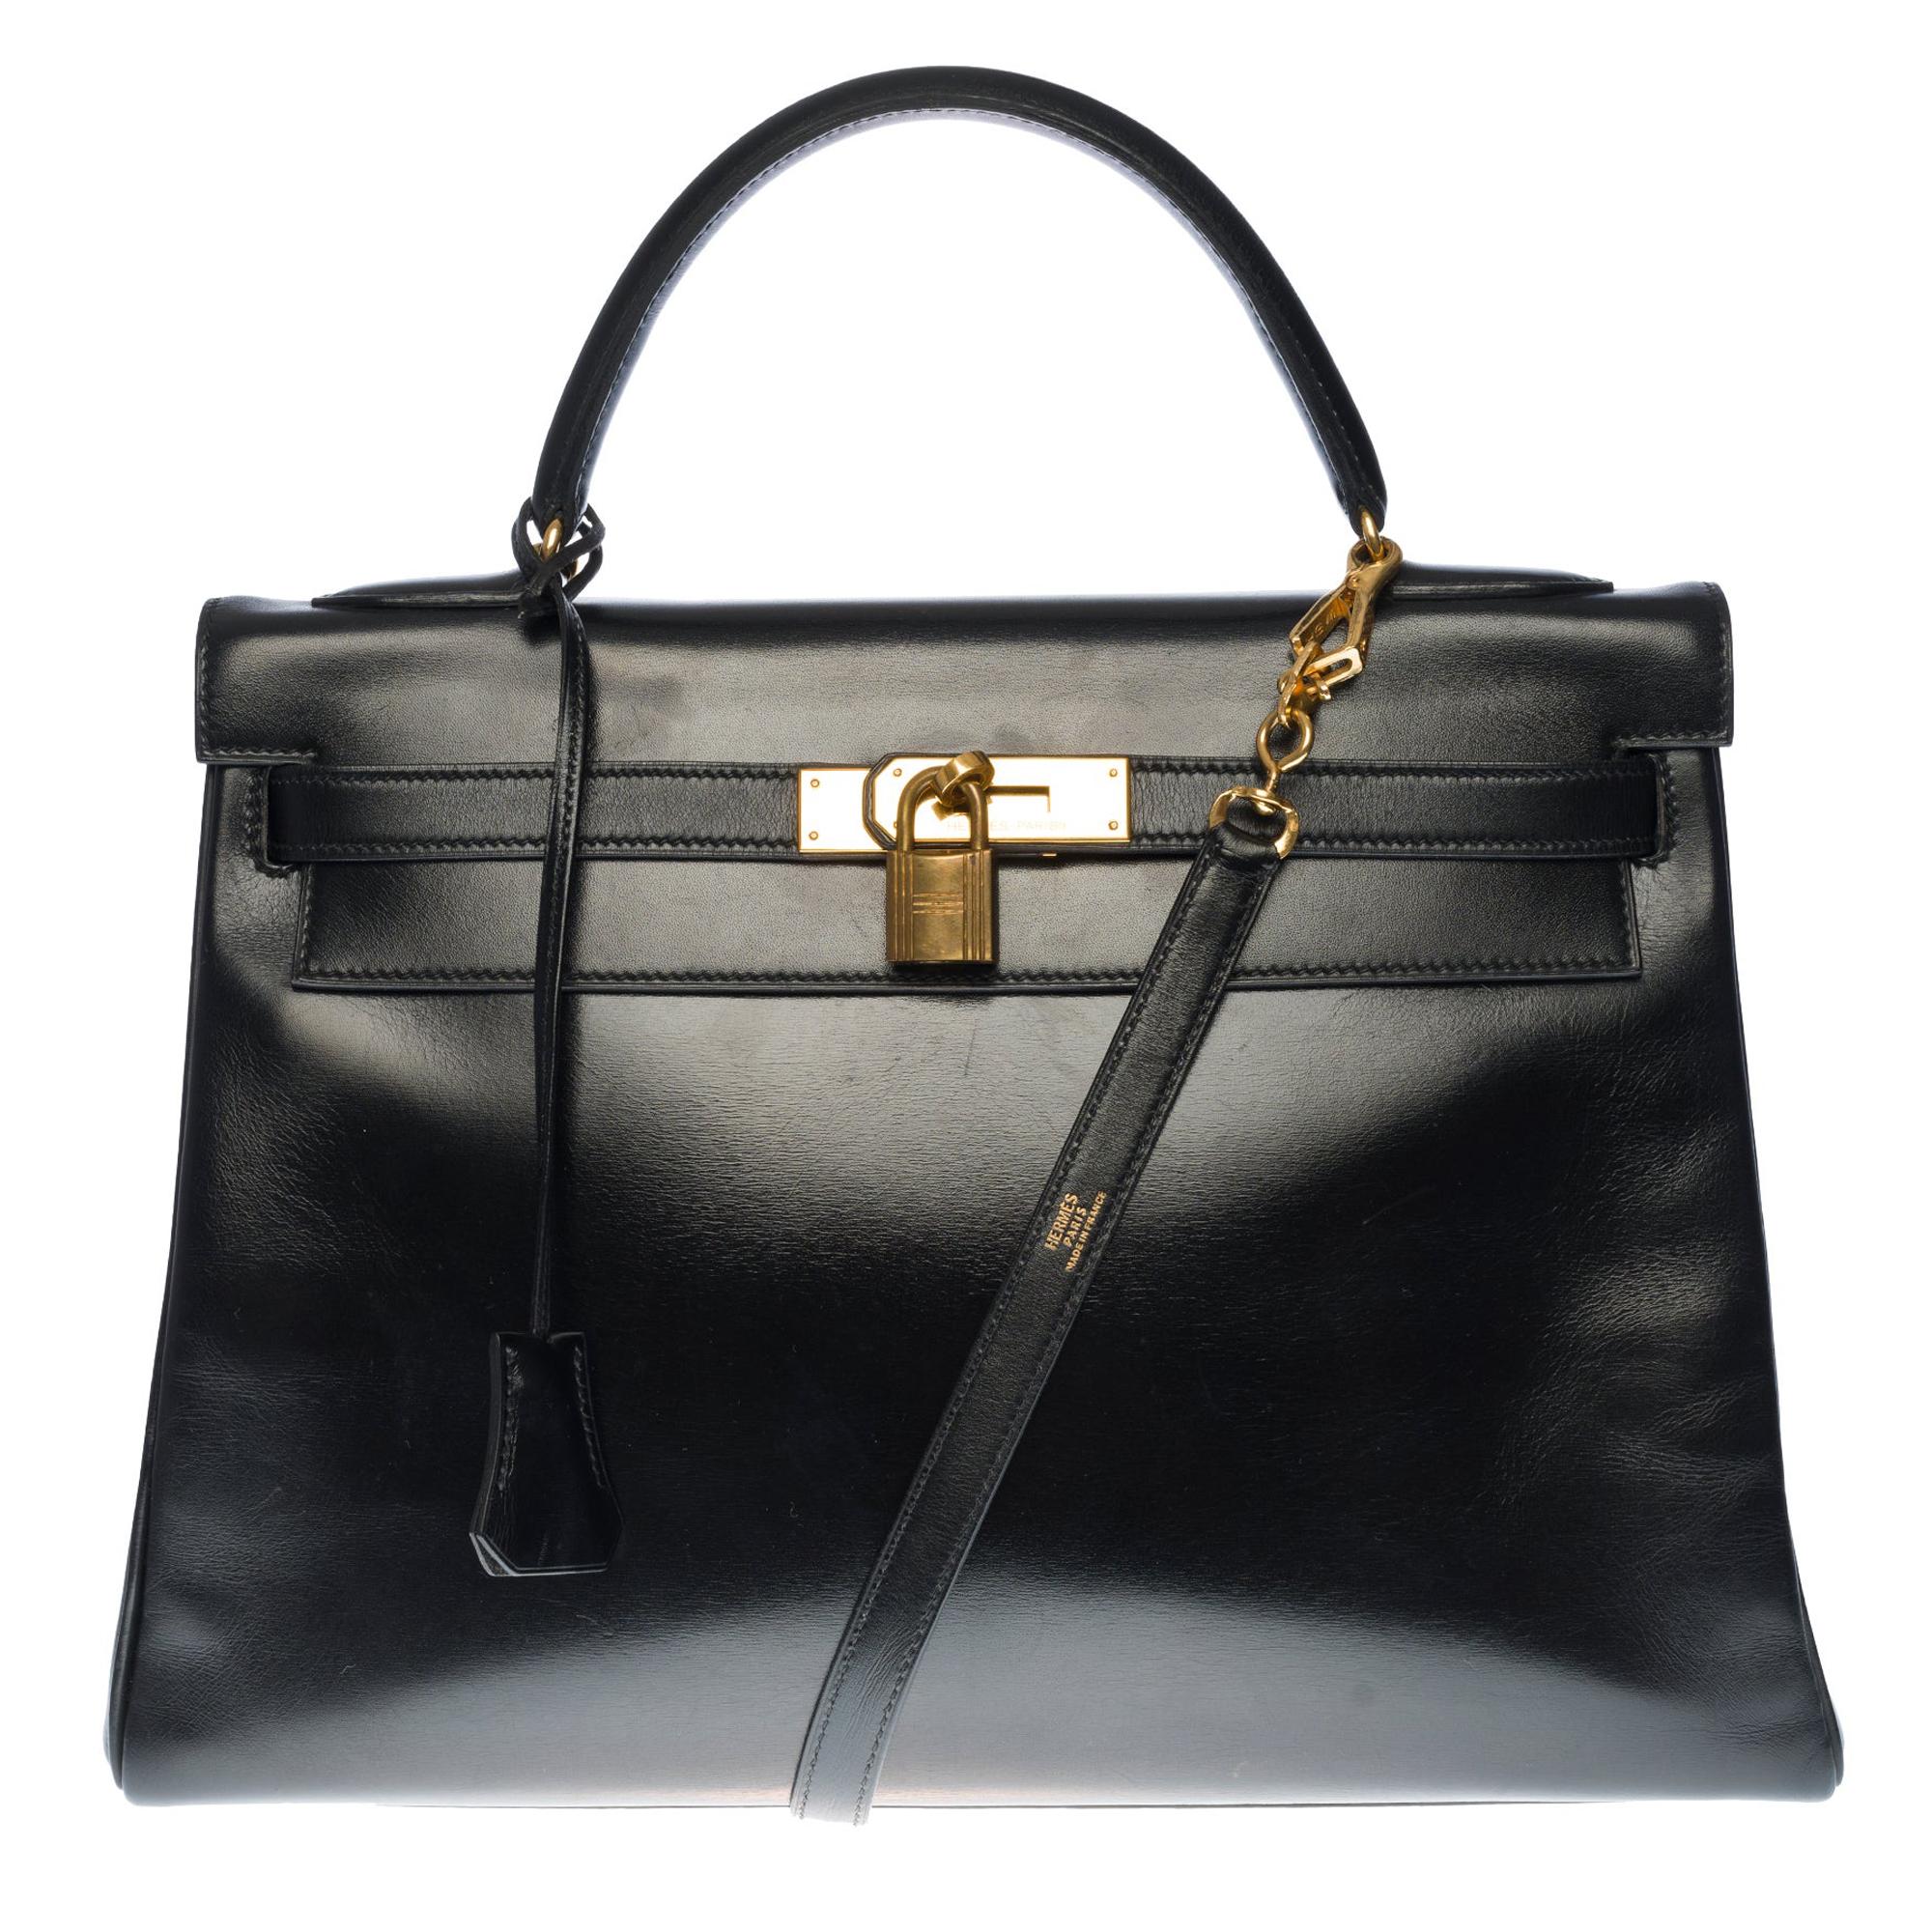 Hermès Kelly 32cm handbag with strap in black calf leather and gold hardware